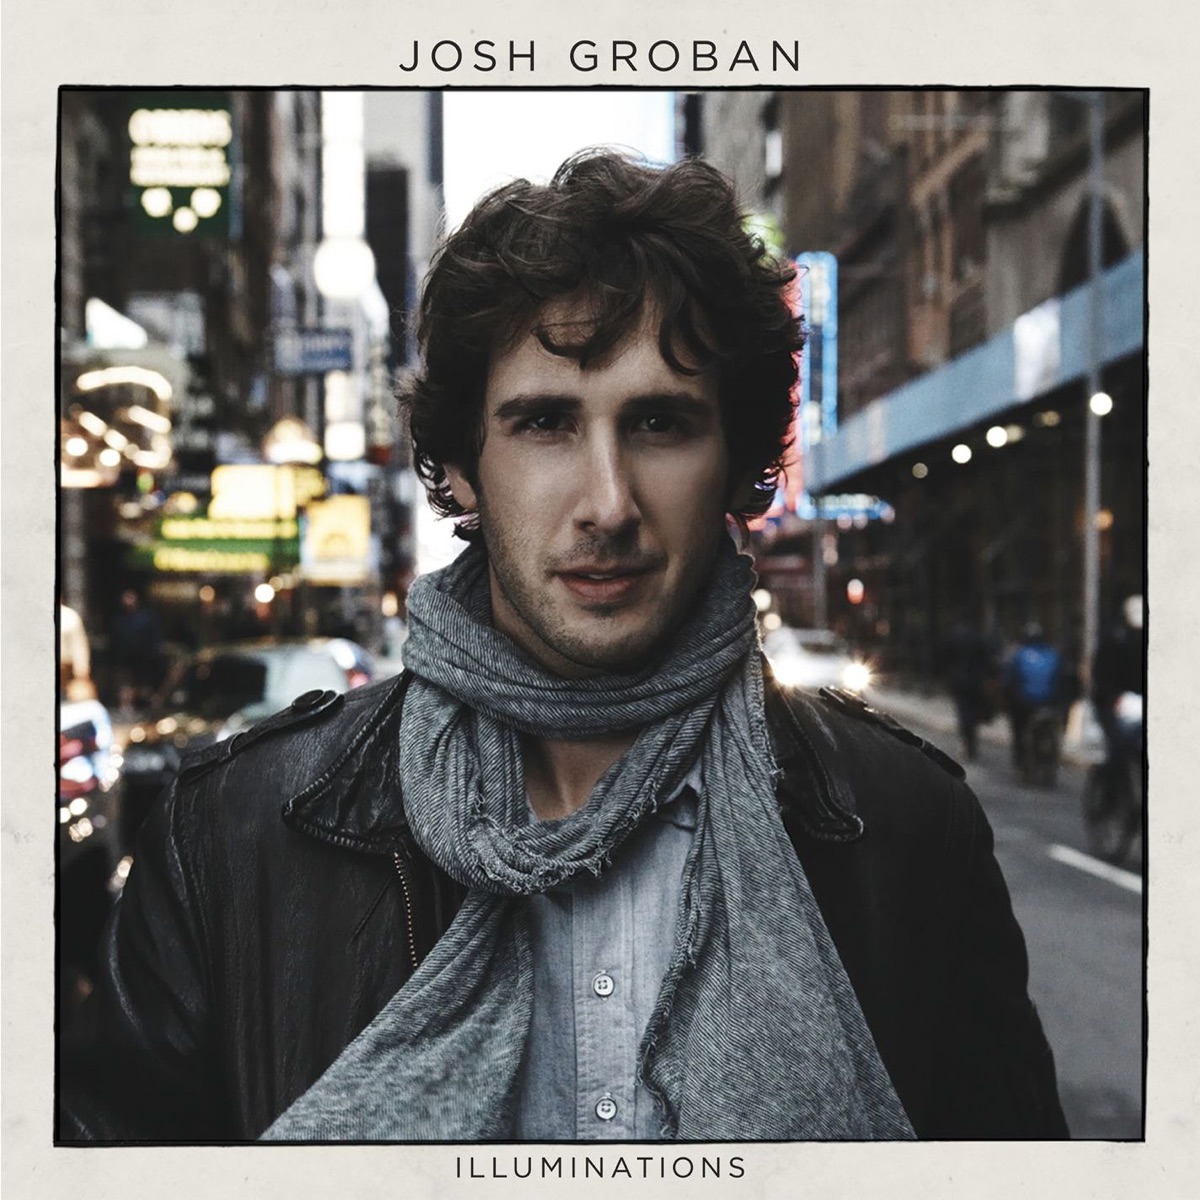 All That Echoes (Deluxe Version) by Josh Groban on Apple Music